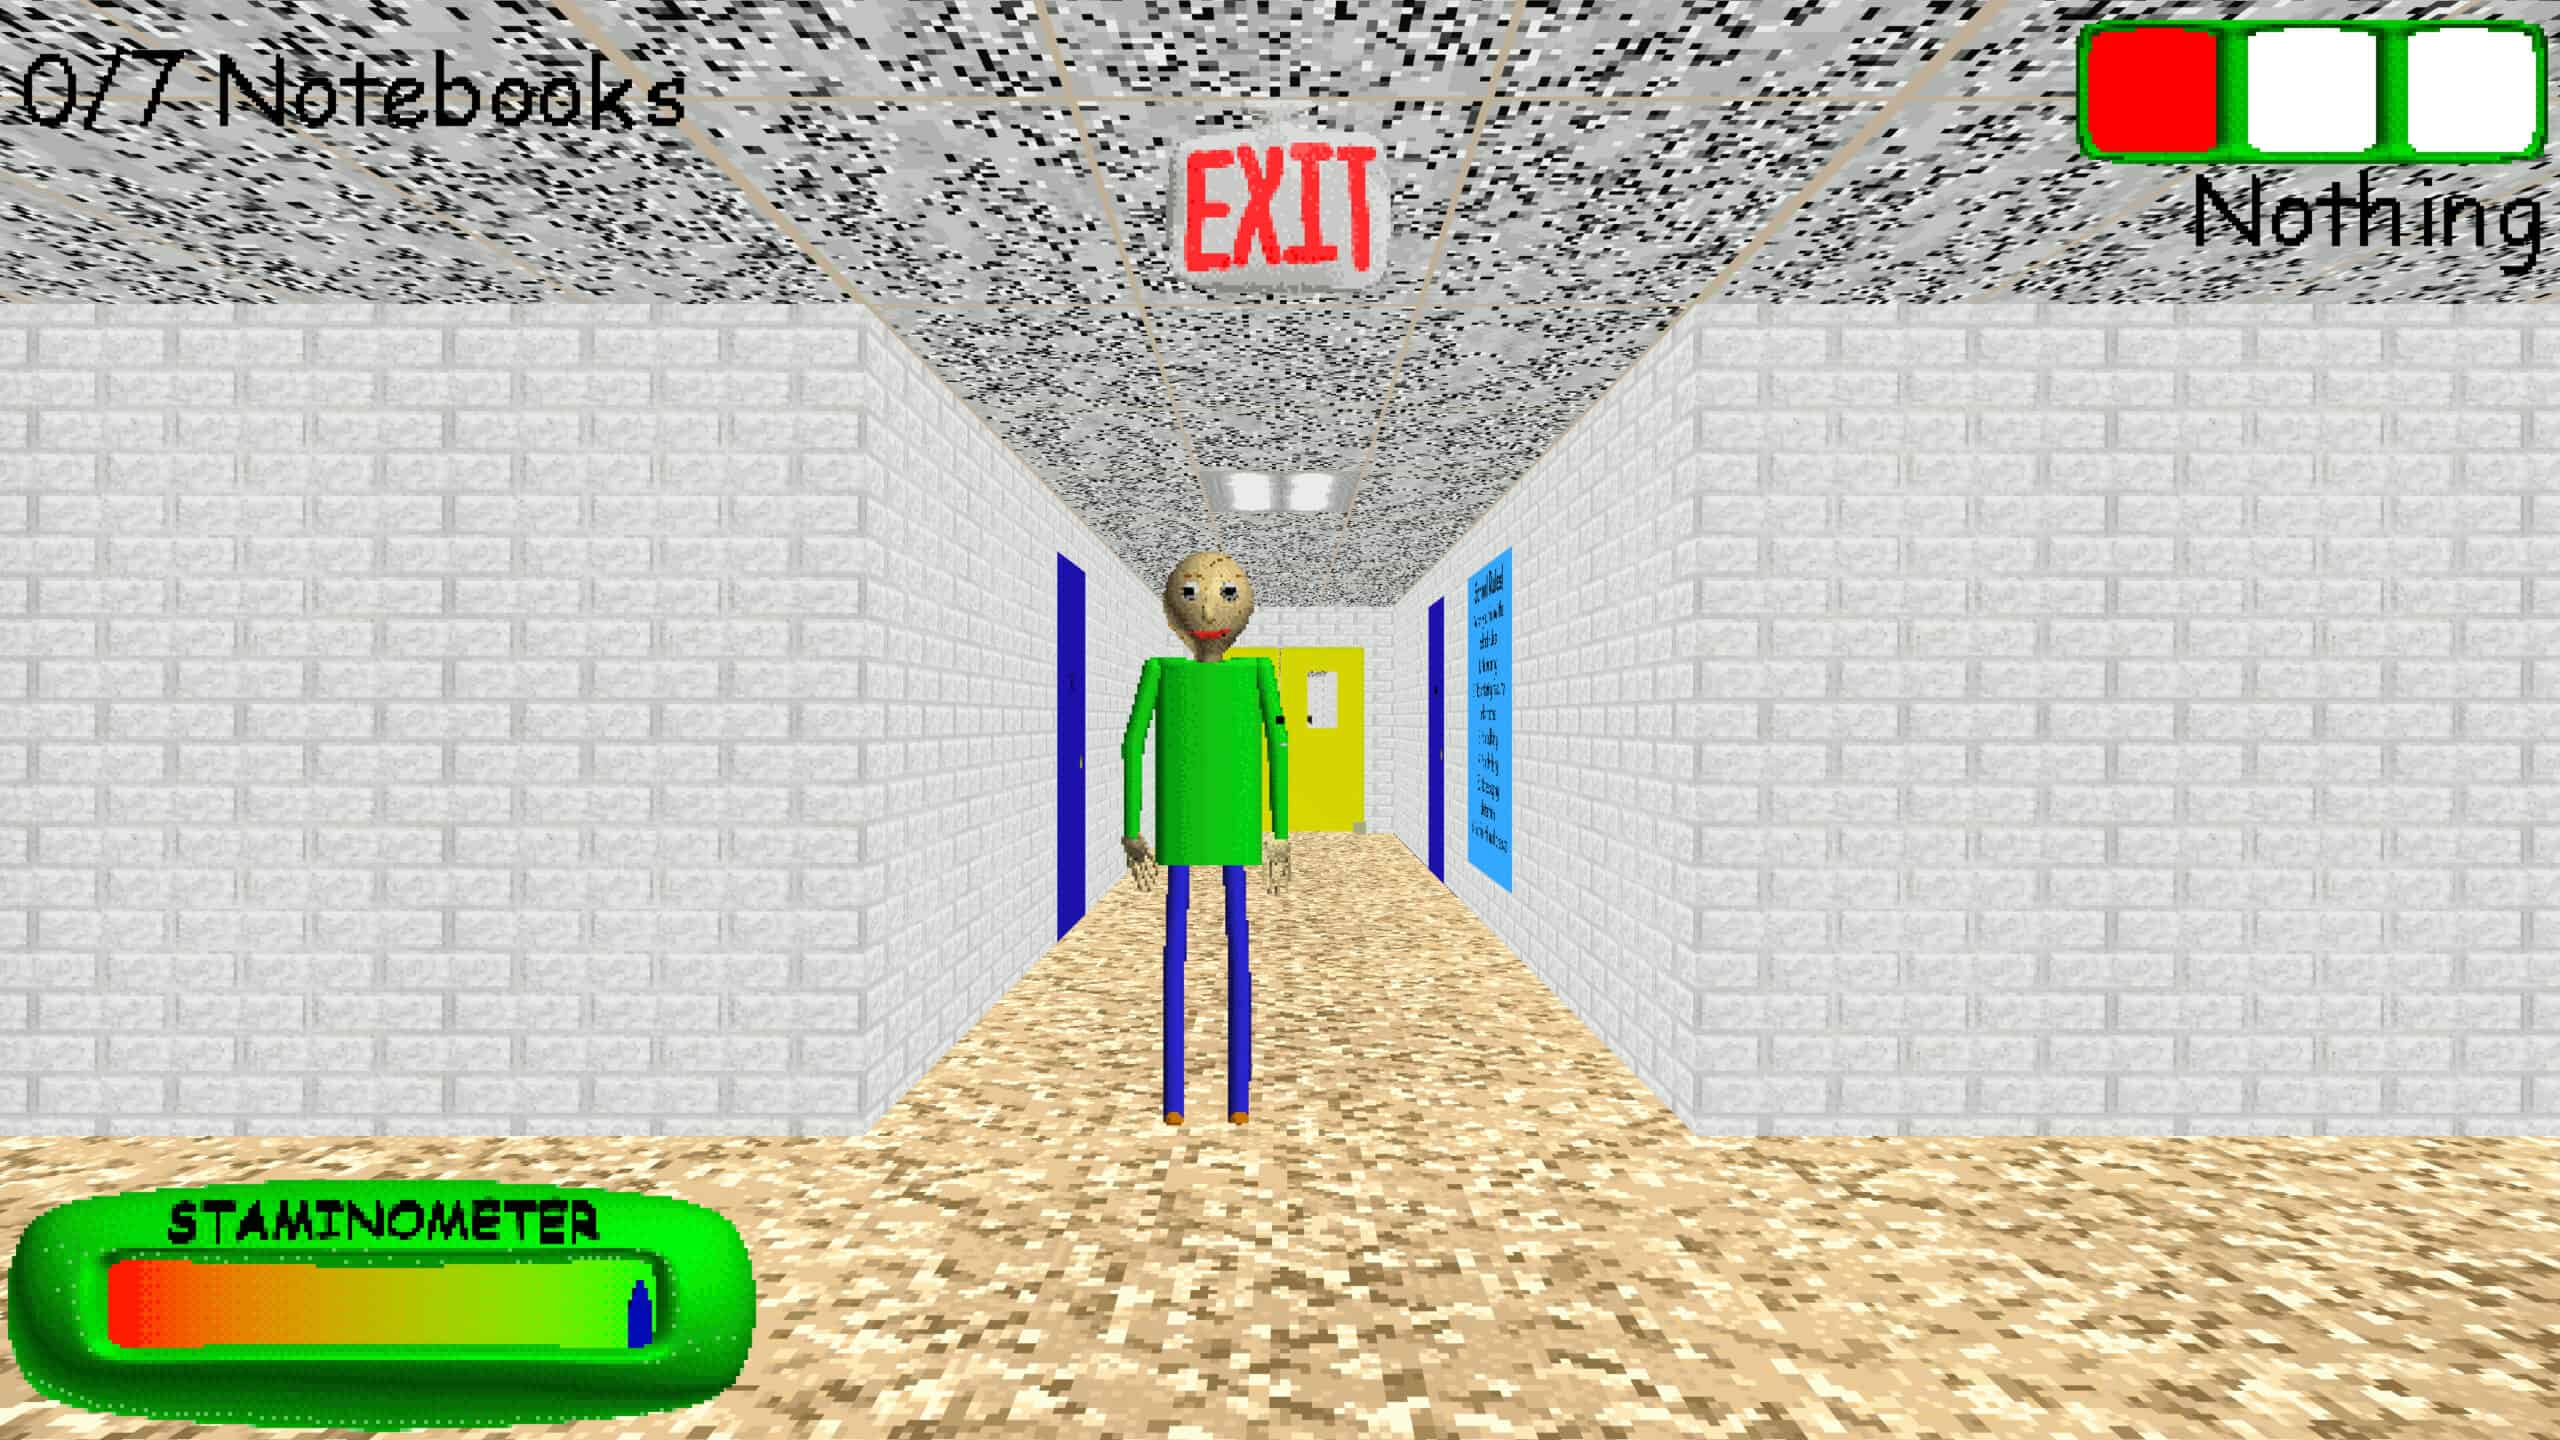 A Steam promotional image for Baldi’s Basics in Education and Learning.